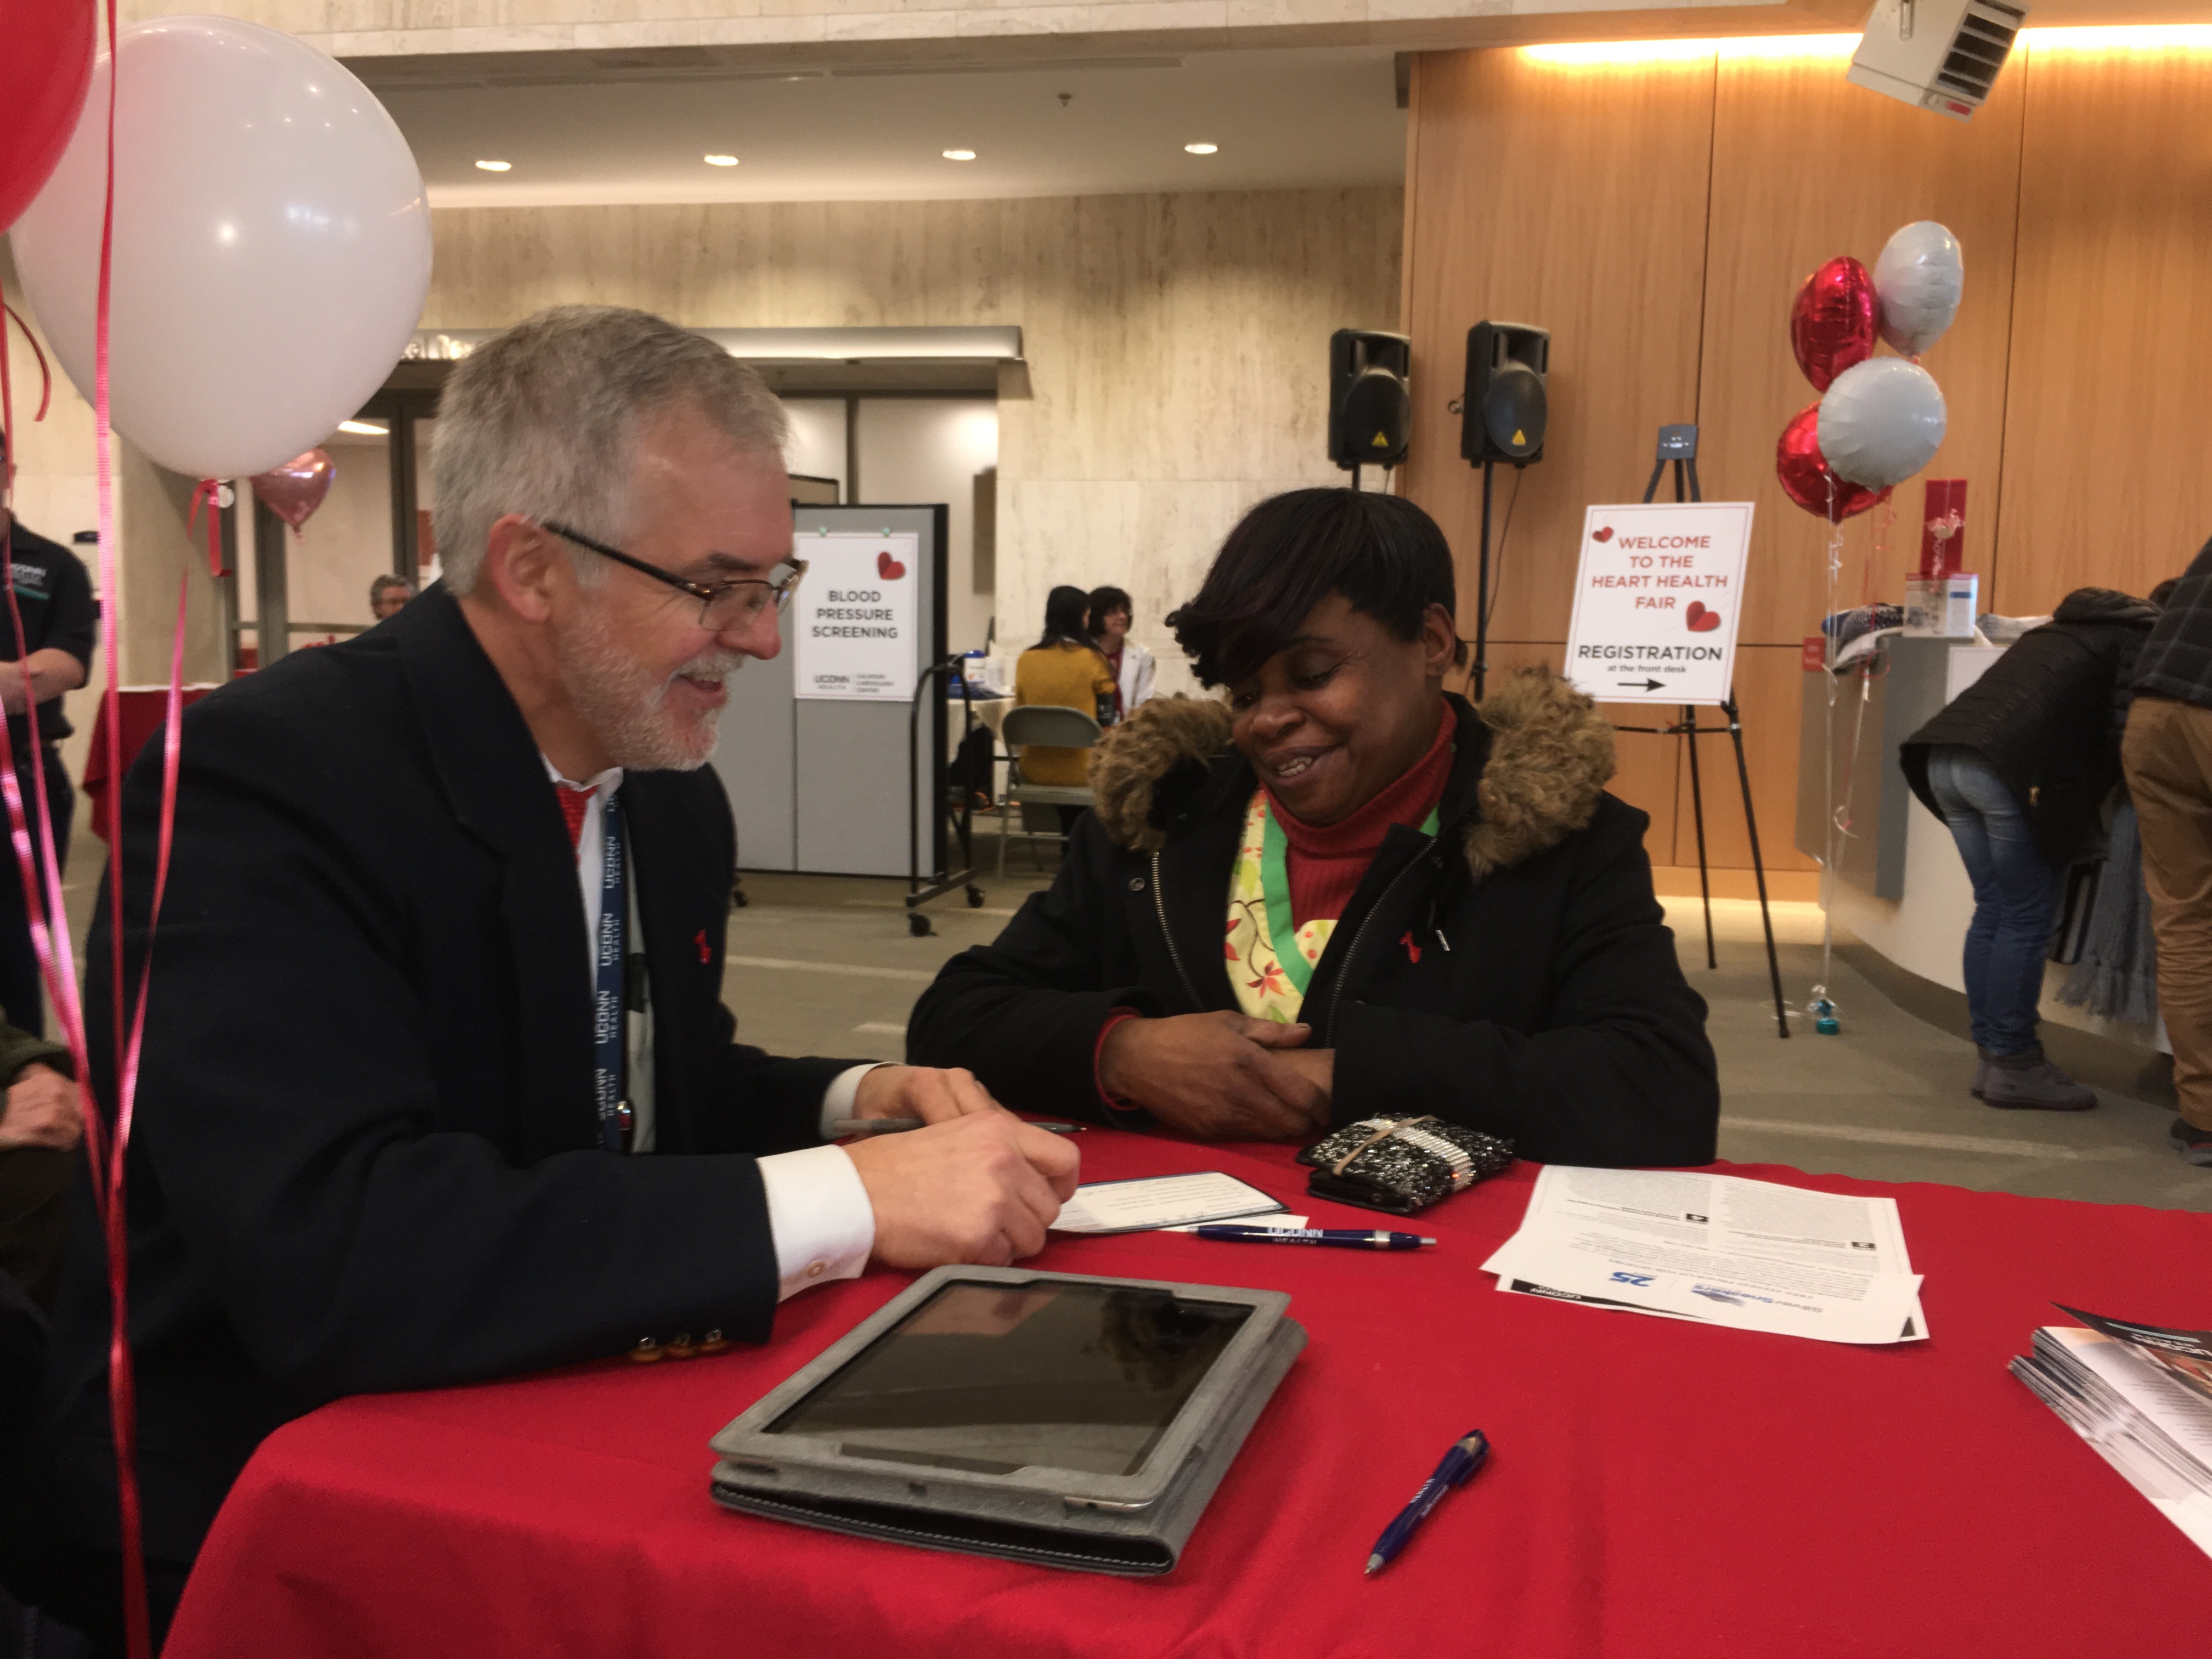 Chir-lane Johnson of New Britain gets the results of her free screenings and a personalized heart health assessment at UConn Health's Heart Health Fair on National Wear Red Day on Feb. 2 (UConn Health Photo/Lauren Woods).